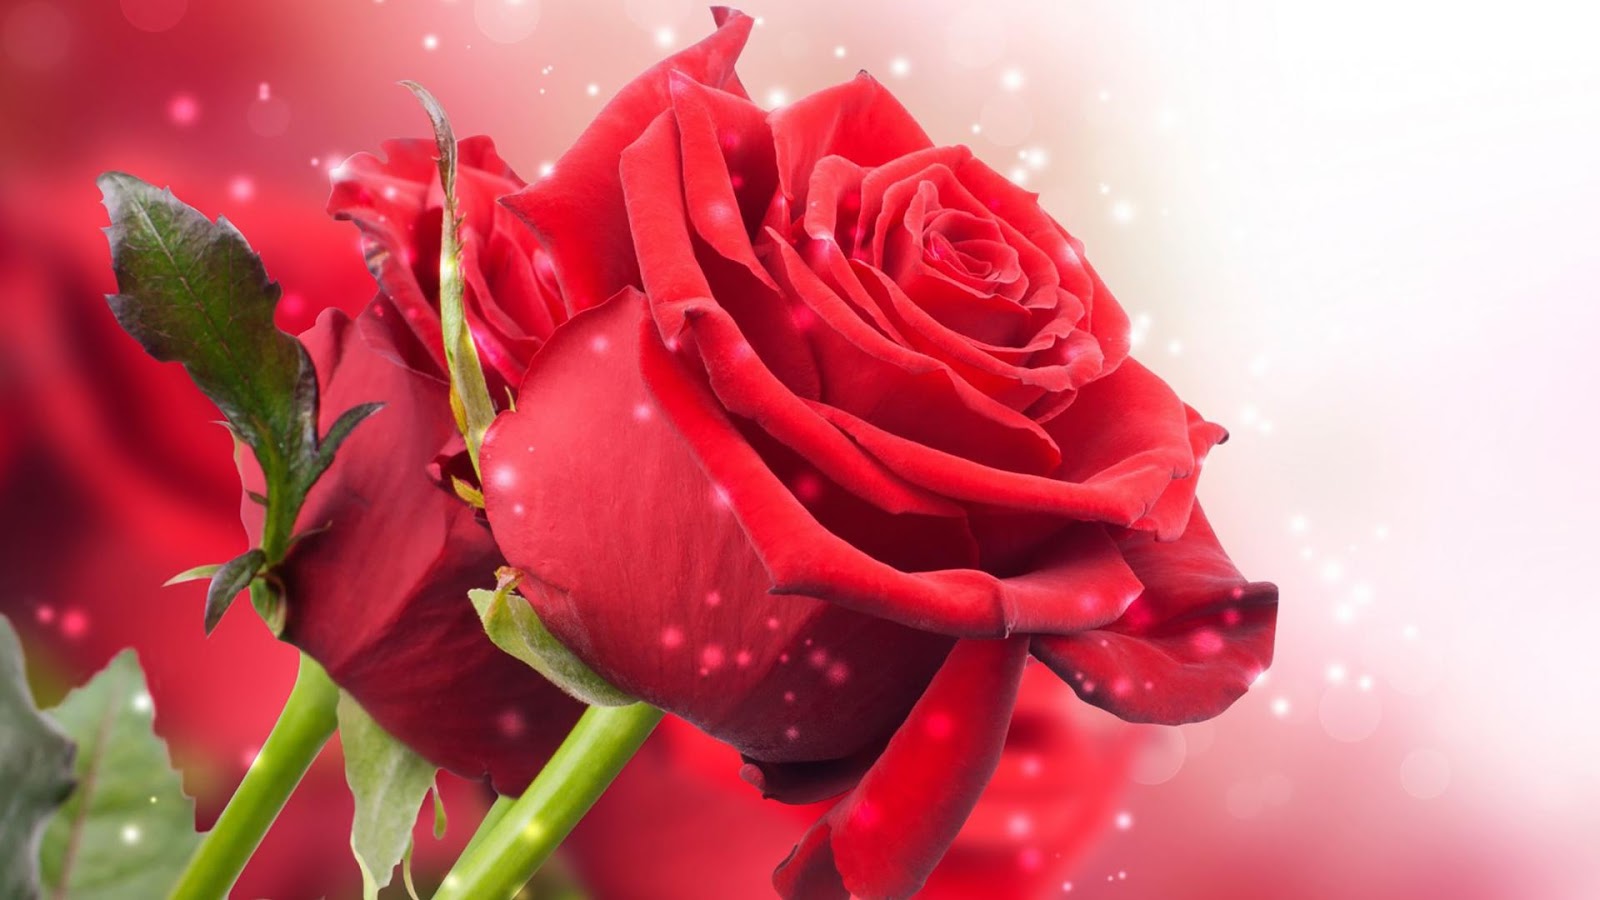 Red Rose Live Wallpaper   Android Apps on Google Play